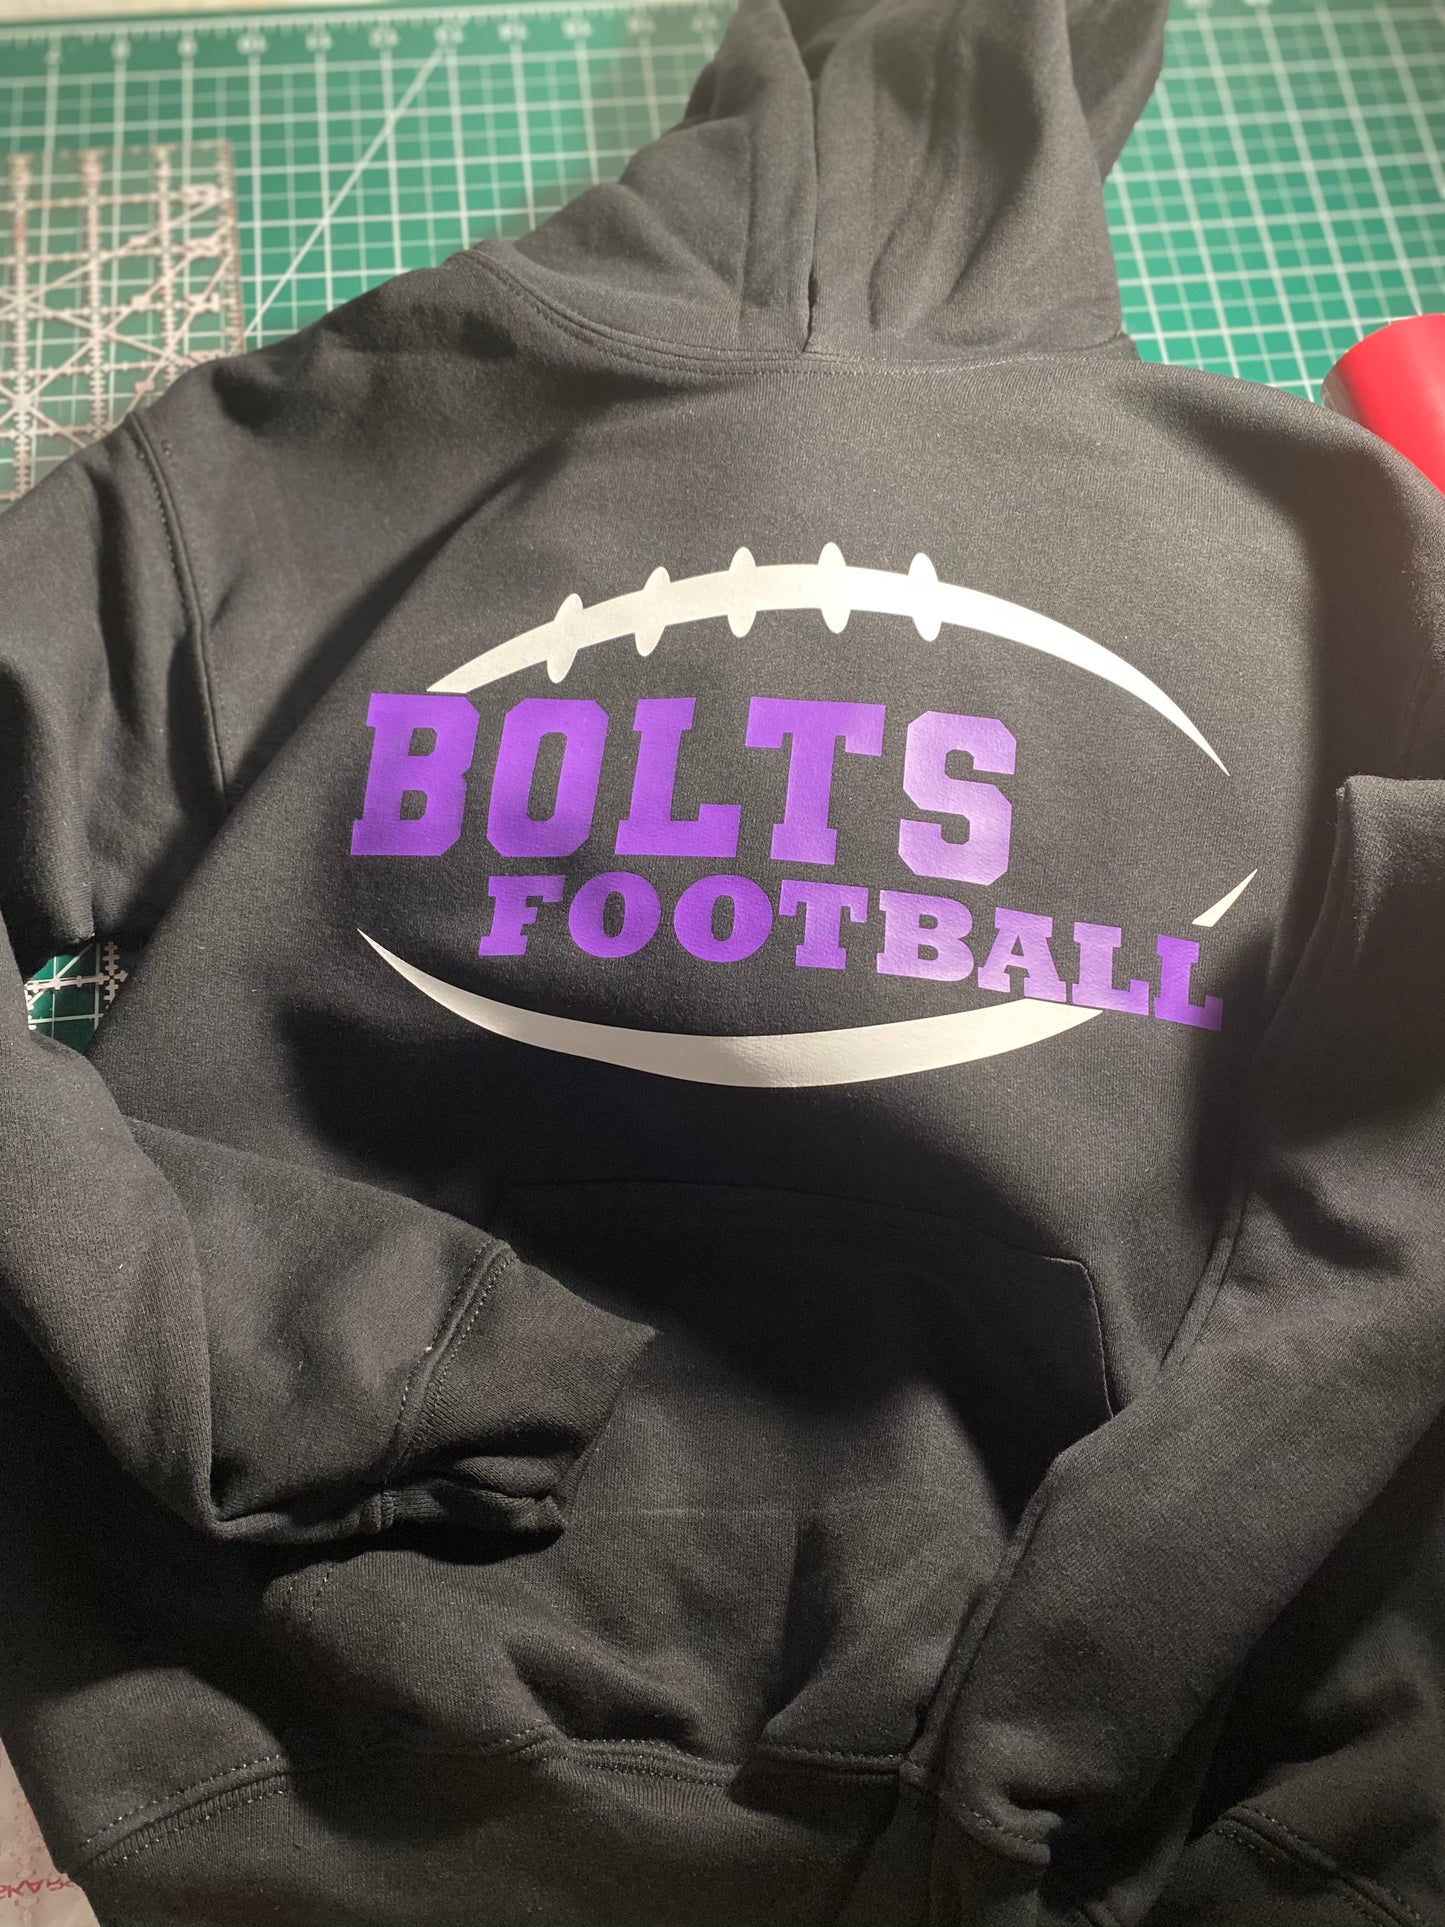 Baxter Football Toddler/Youth Hoodies